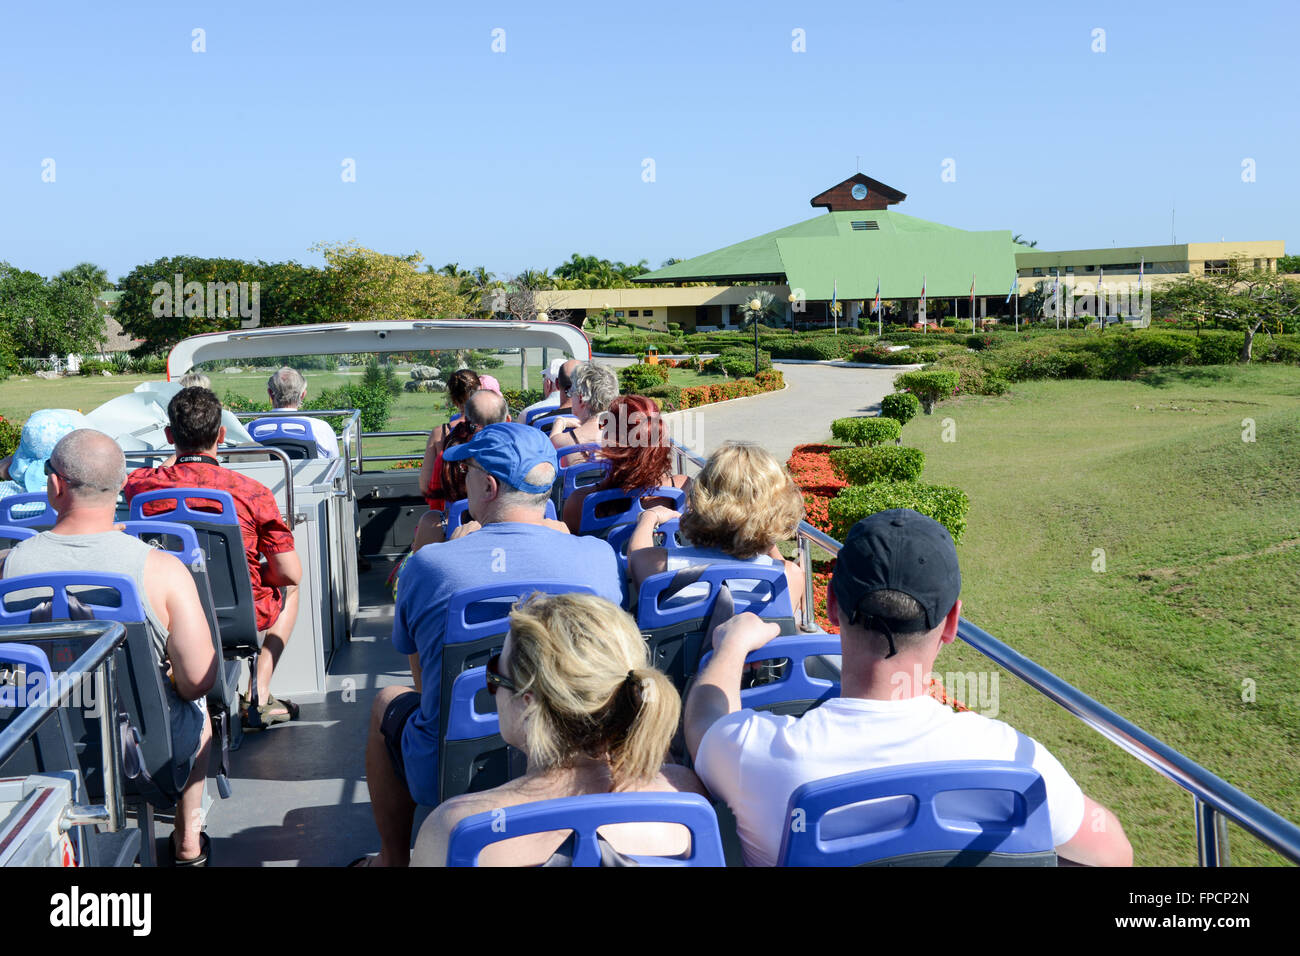 Cayo Coco, Cuba, 16 january 2016 - people on a touristic bus in the park of hotel Tryp Coco on Cayo Coco, Cuba Stock Photo